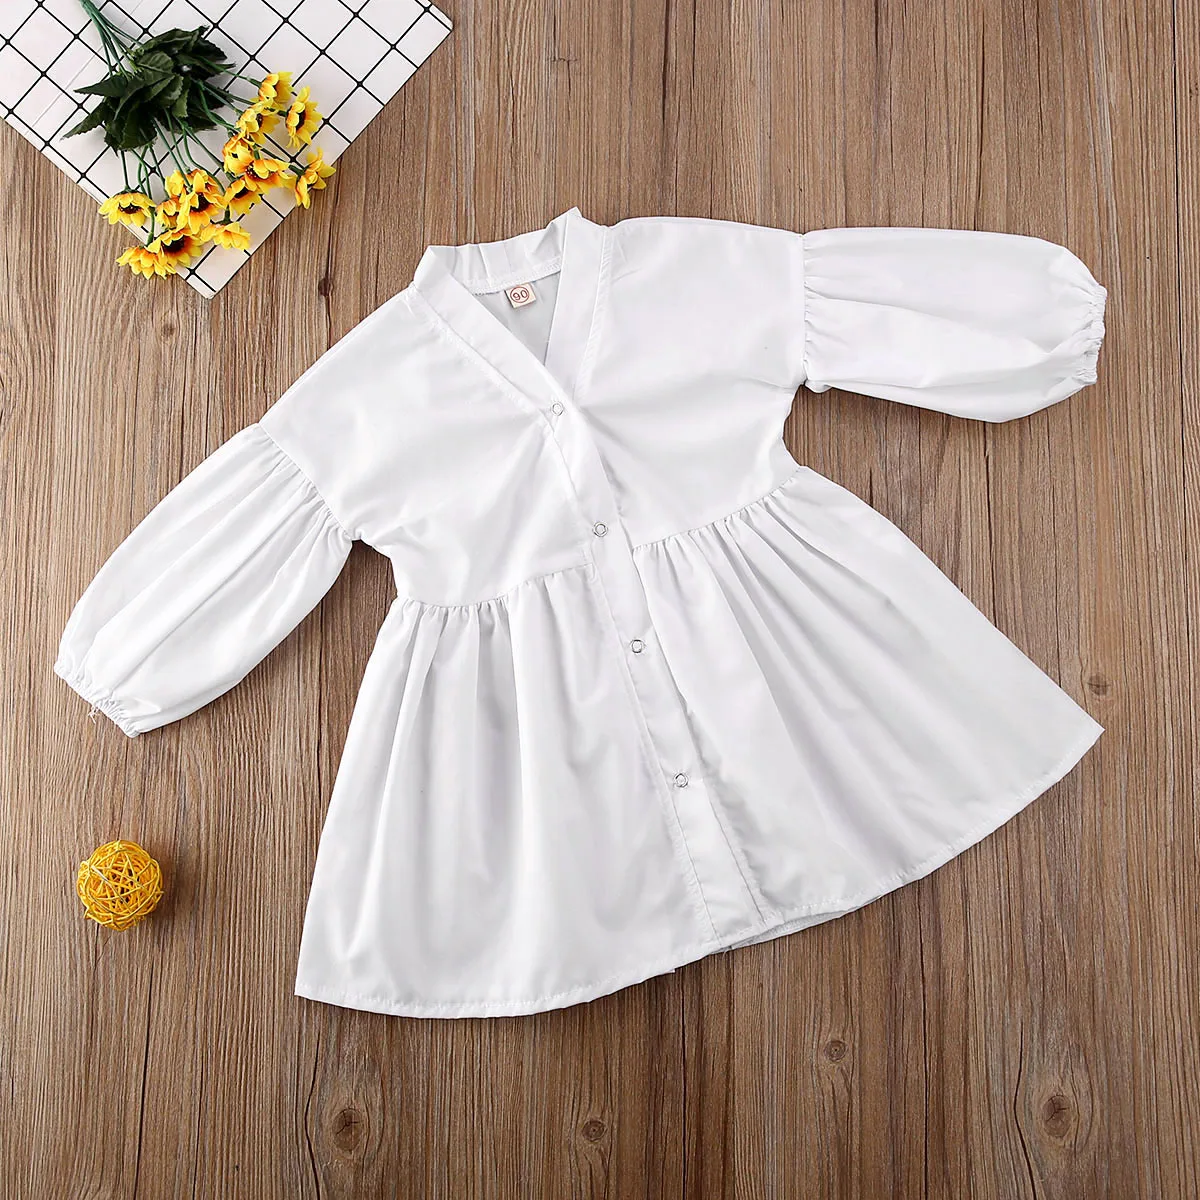 2020 Baby Spring Autumn Clothing Toddler Kid Girl Clothes Long Puff Sleeve Wasit Shirt Top Dress Outfit With Elastic Girdle | Детская